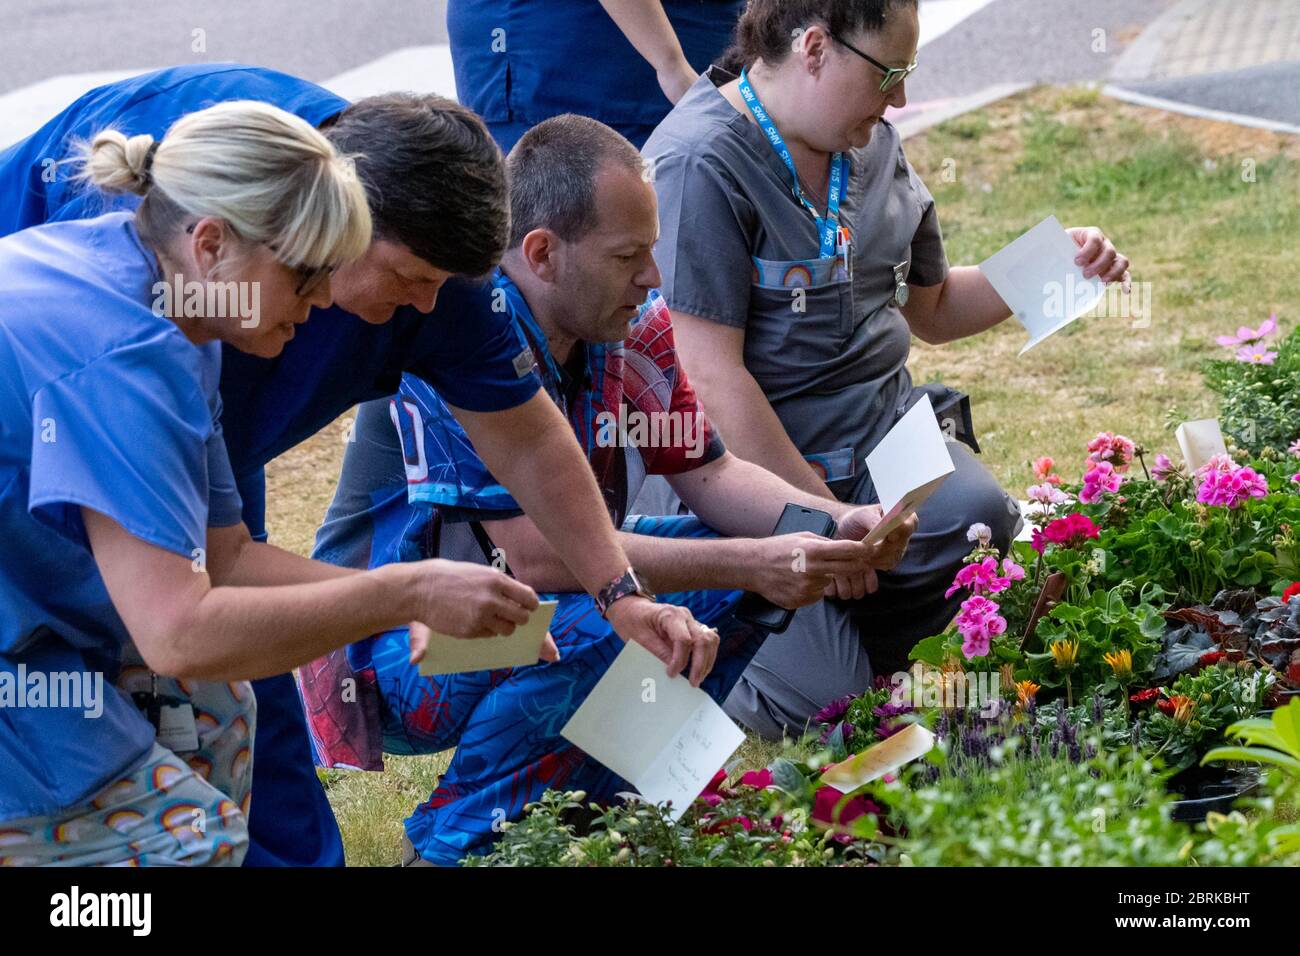 Brentwood Essex 21st May 2020 Clap for NHS at Brentwood Commuity hosptial, currently a covid facility. Local residents had purchased over 120 plants for the staff for their gardens. Another resident of the road had made 'superhero' scrubs for staff some of whom are pictured NHS staff read cards that came with the plants from local residents Credit: Ian Davidson/Alamy Live News Stock Photo